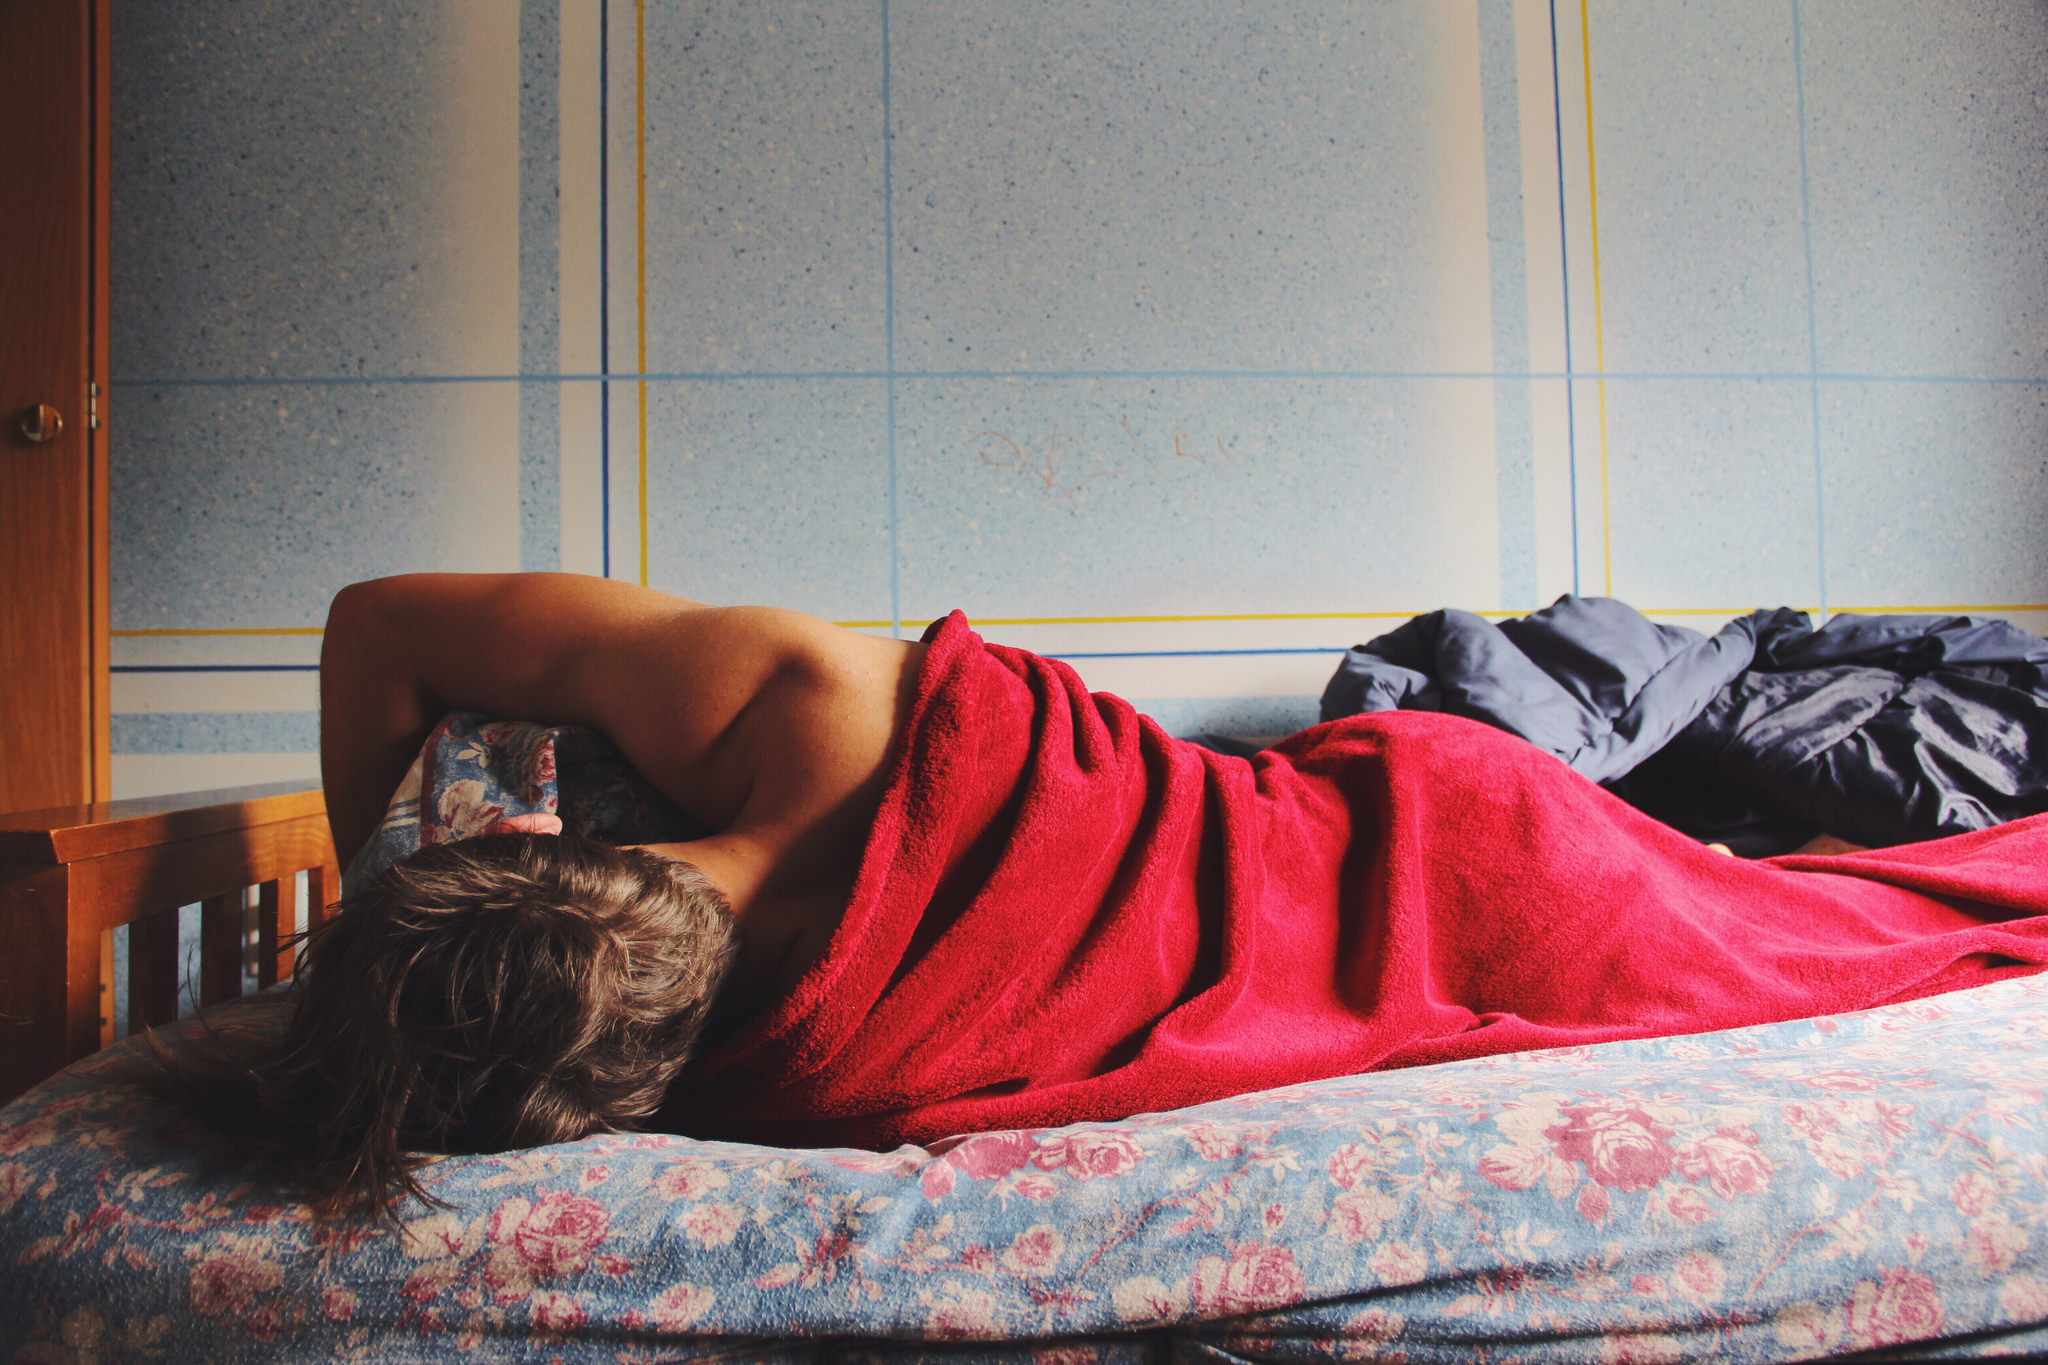 16 Insanely Hot Ways To Wake Him Up With An Orgasm Thought Catalog pic